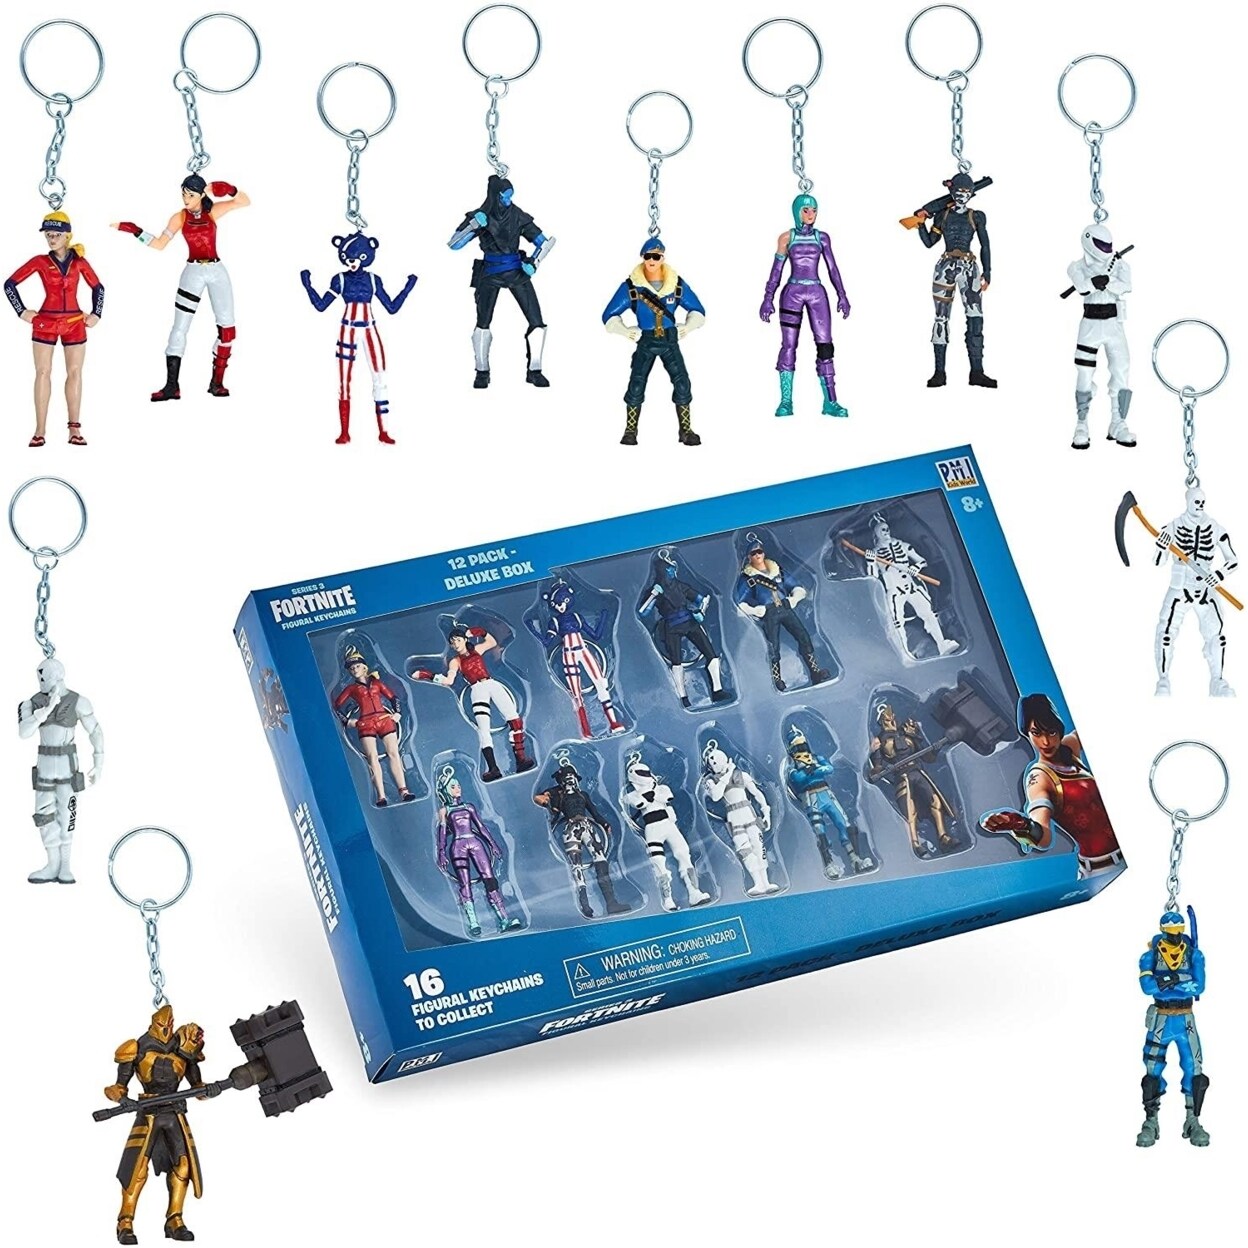 PMI International Fortnite Popular Character Keychains 12pk Collectible Deluxe Box Figures